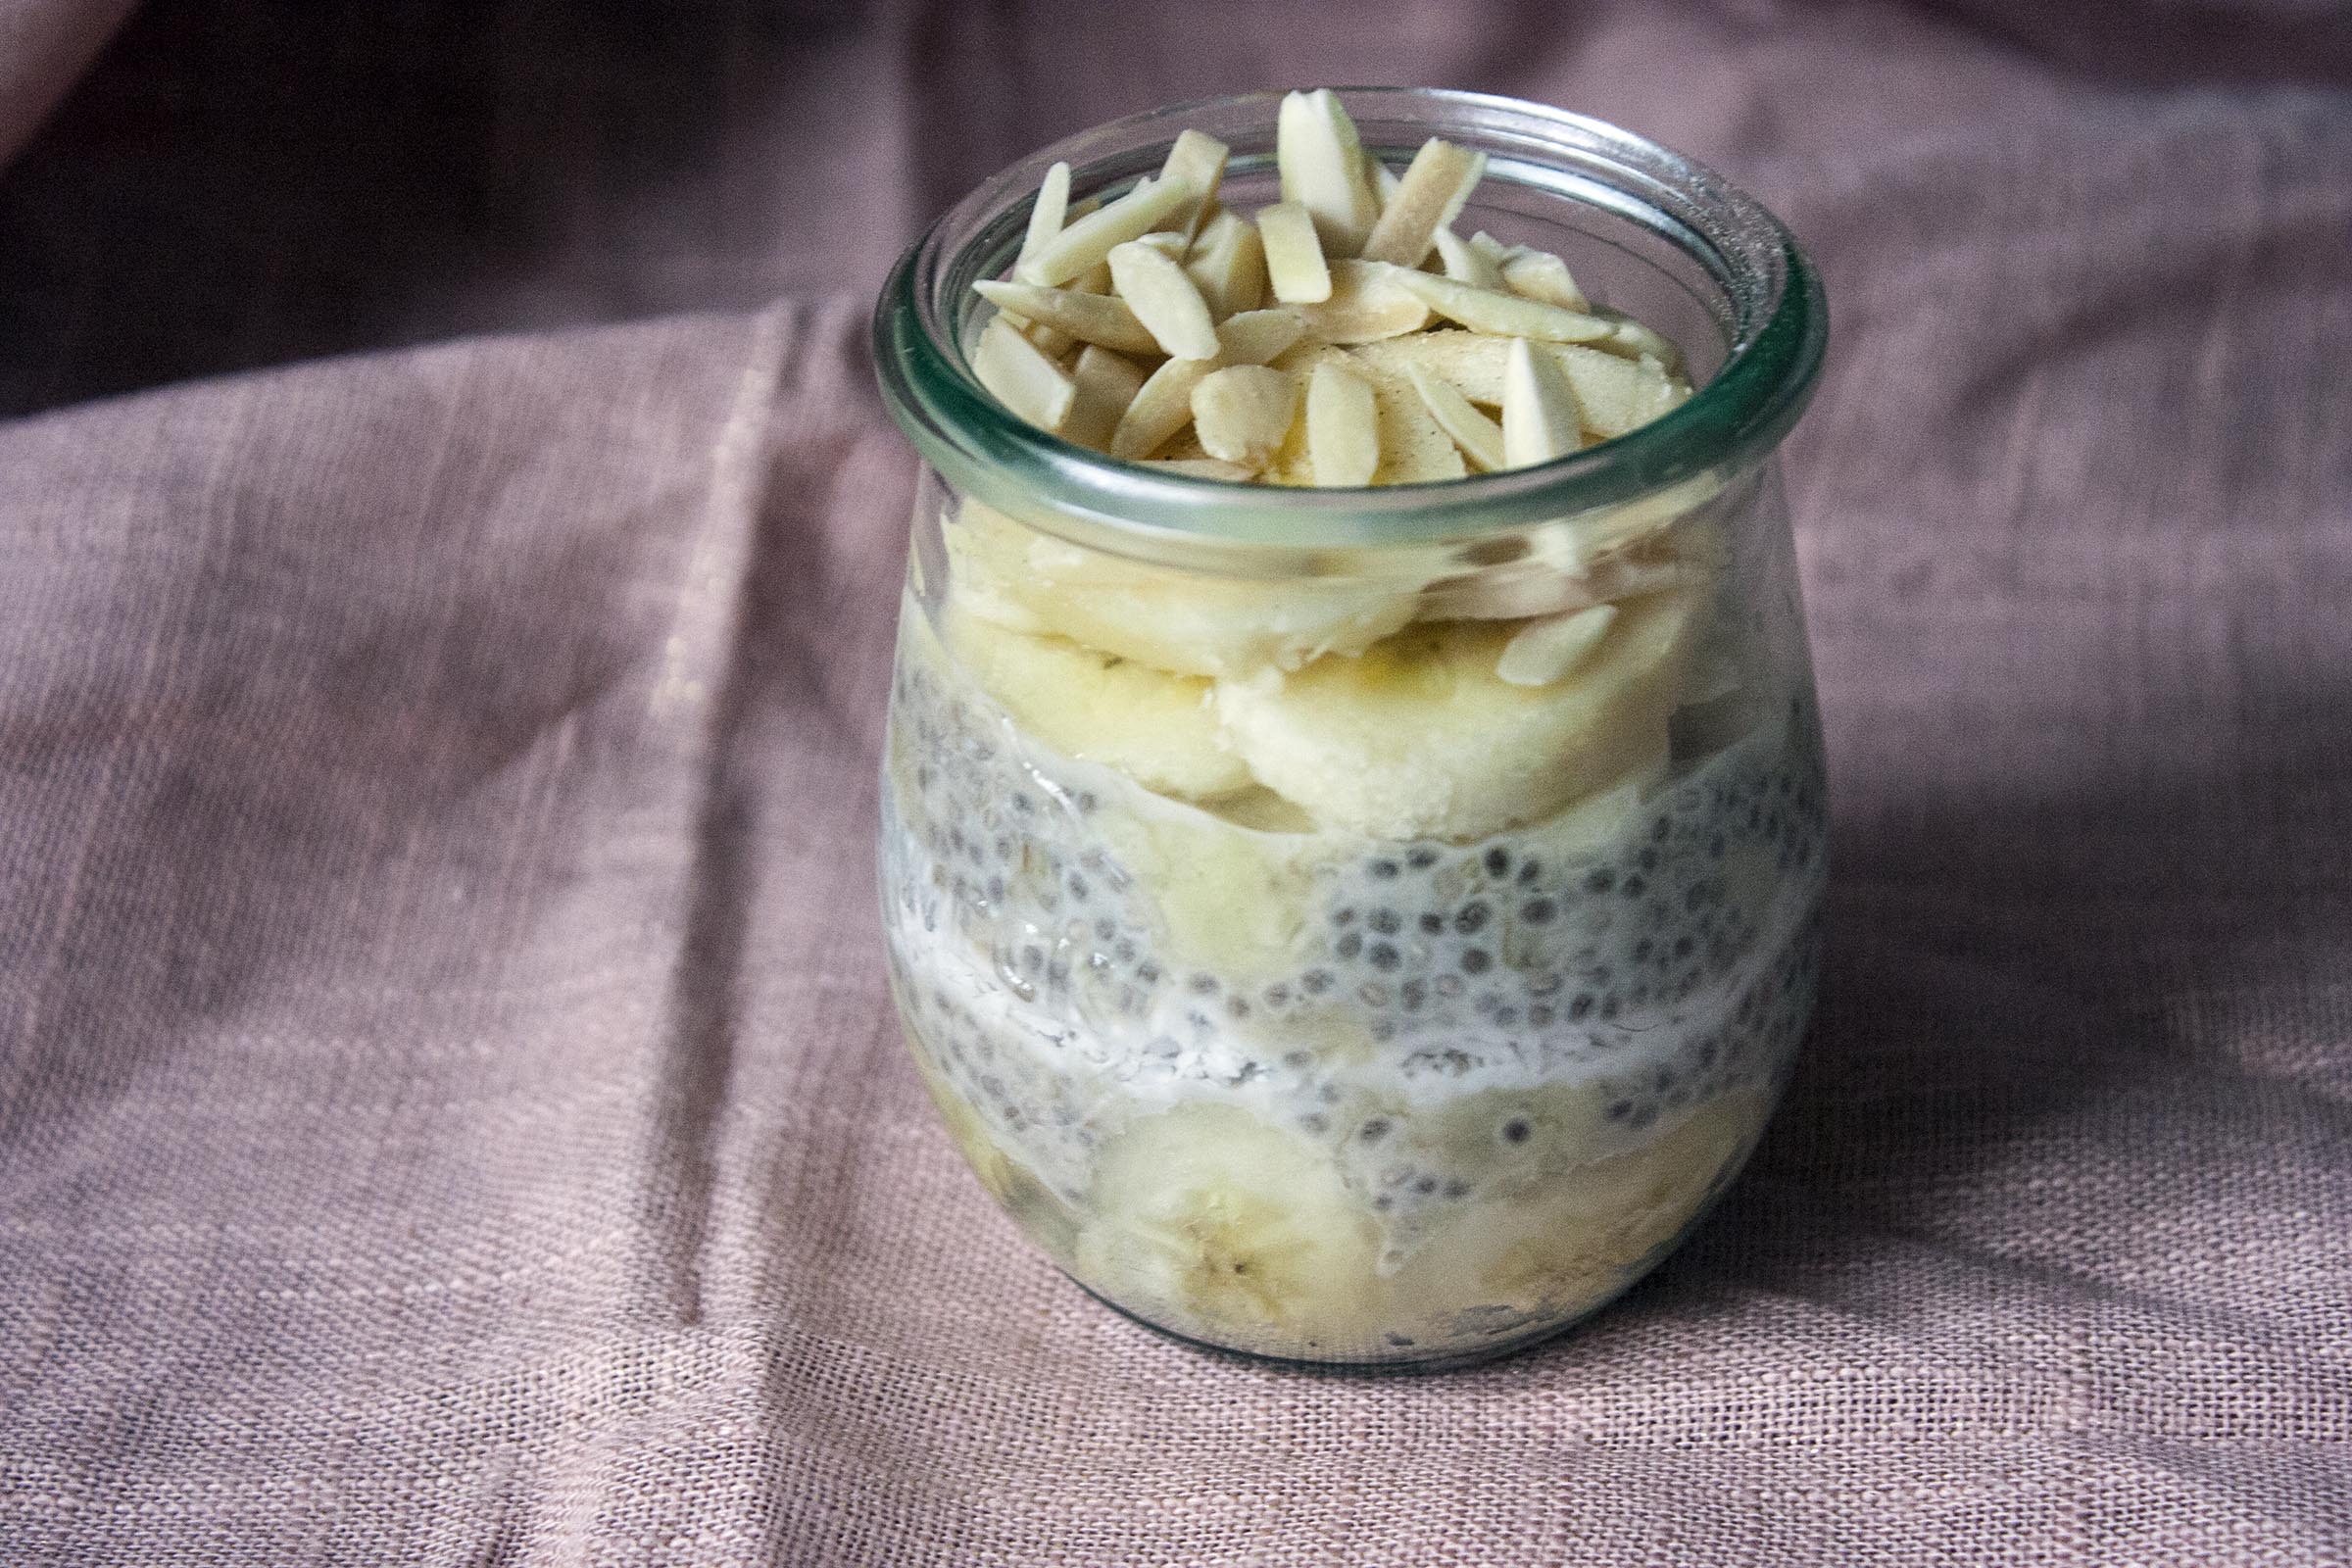 Creamy, lightly spiced Banana Cardamom Chia Pudding whisked together with Homemade Coconut Milk. www.lifeaswecookit.com